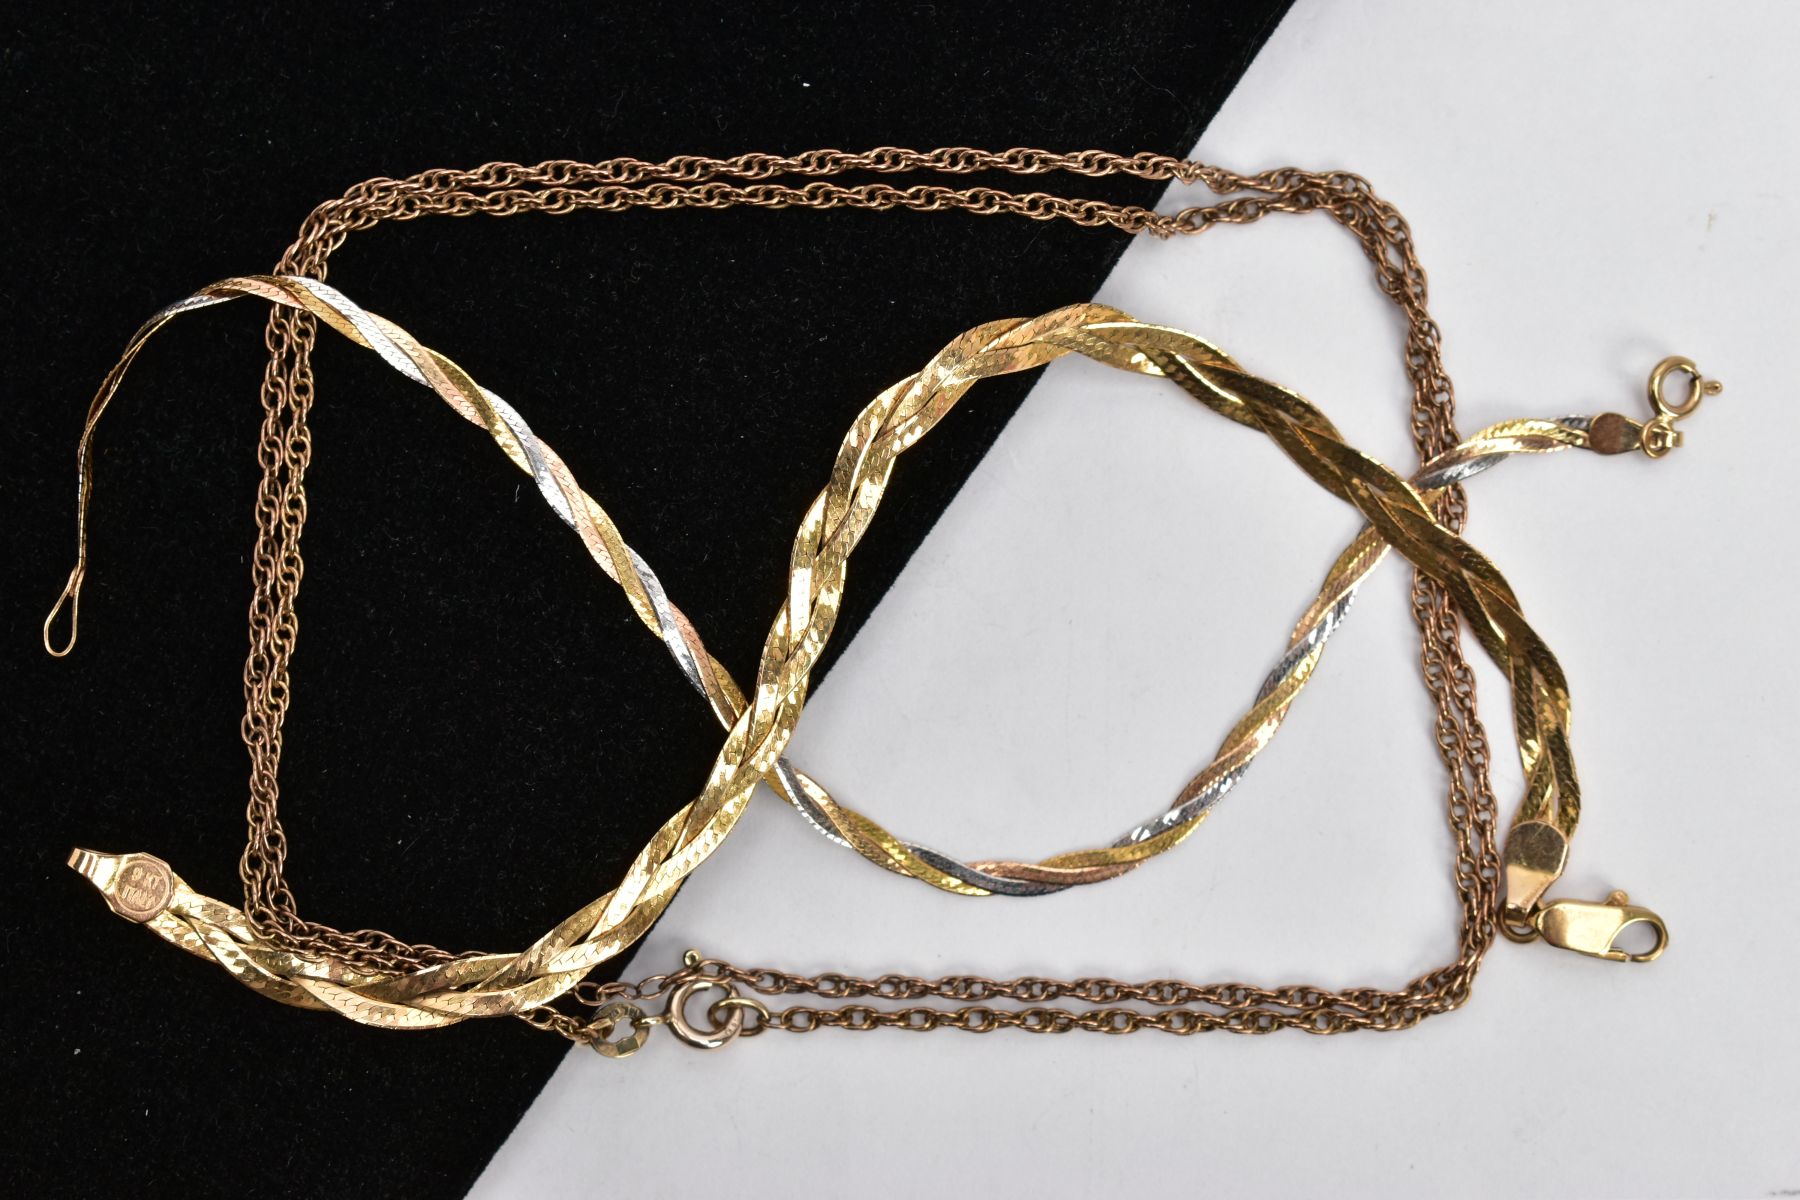 TWO 9CT GOLD PLAIT BRACELETS AND A CURB LINK CHAIN, the first plait bracelet fitted with a lobster